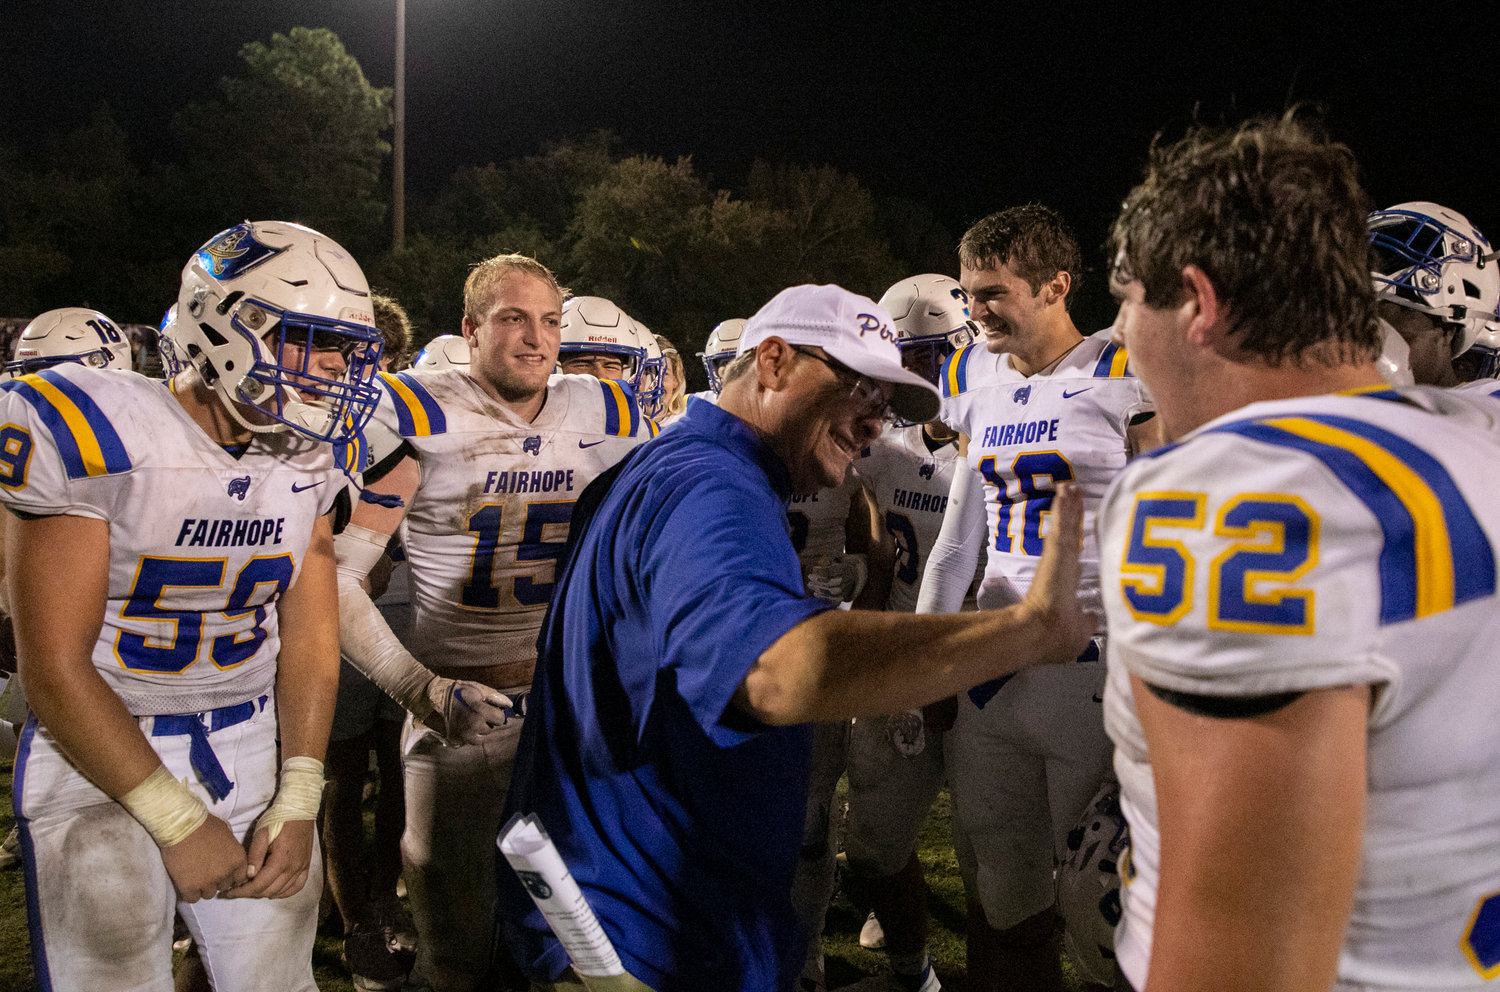 The Fairhope Pirates celebrate with head coach Tim Carter who collected his 150th career head coaching victory with the 26-7 decision over Daphne Friday night at Jubilee Stadium.